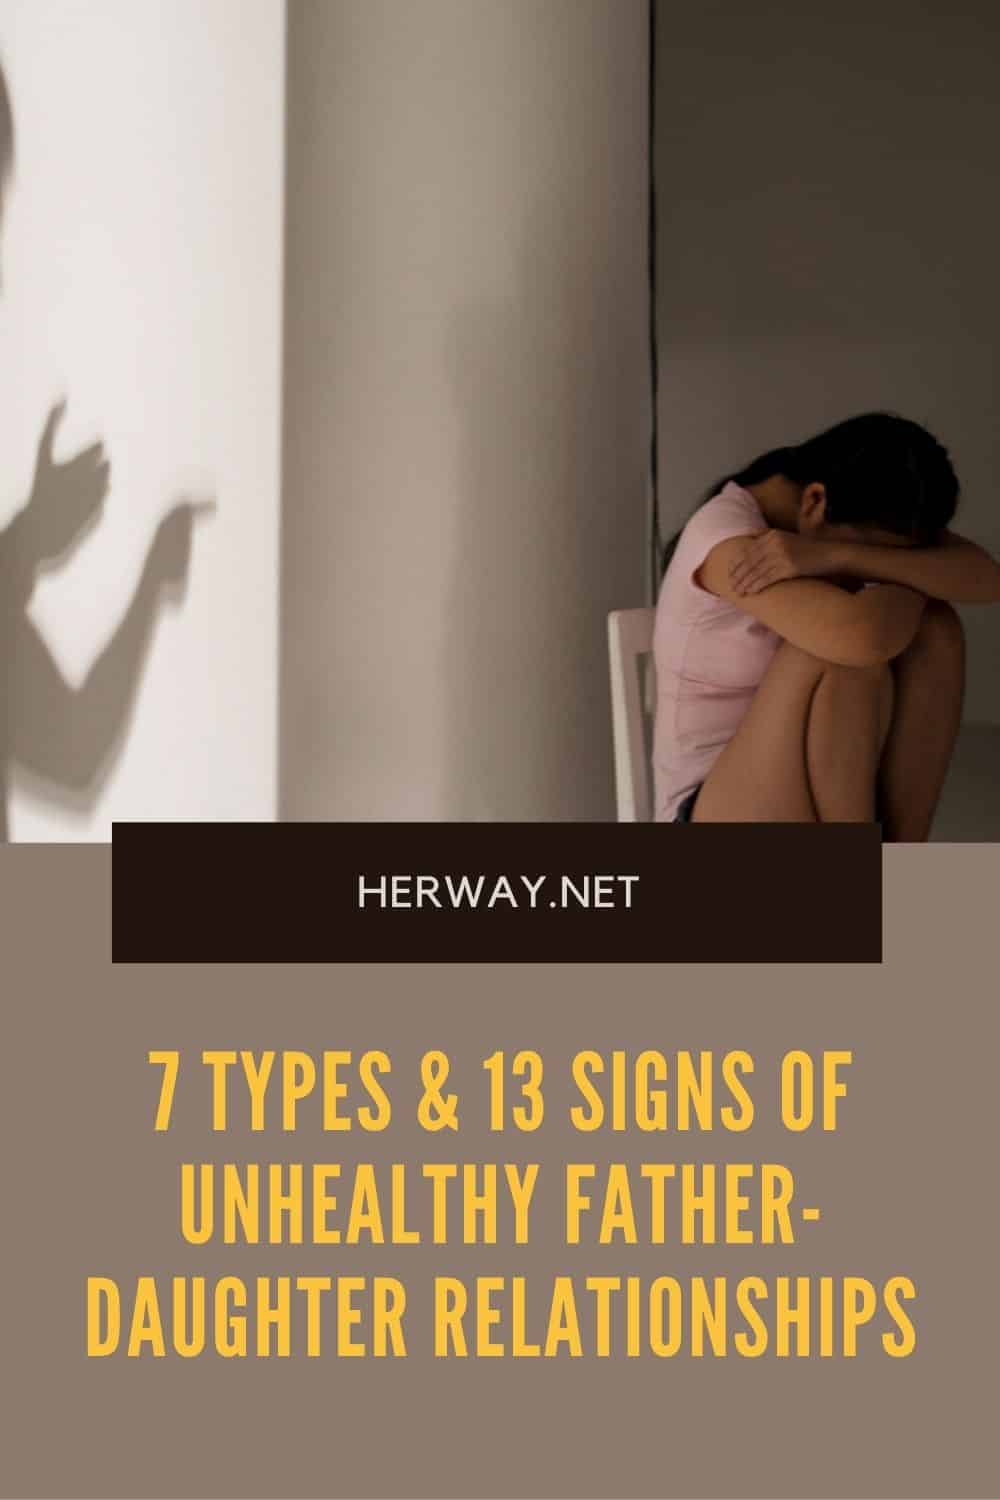 7 Types & 13 Signs Of Unhealthy Father-Daughter Relationships